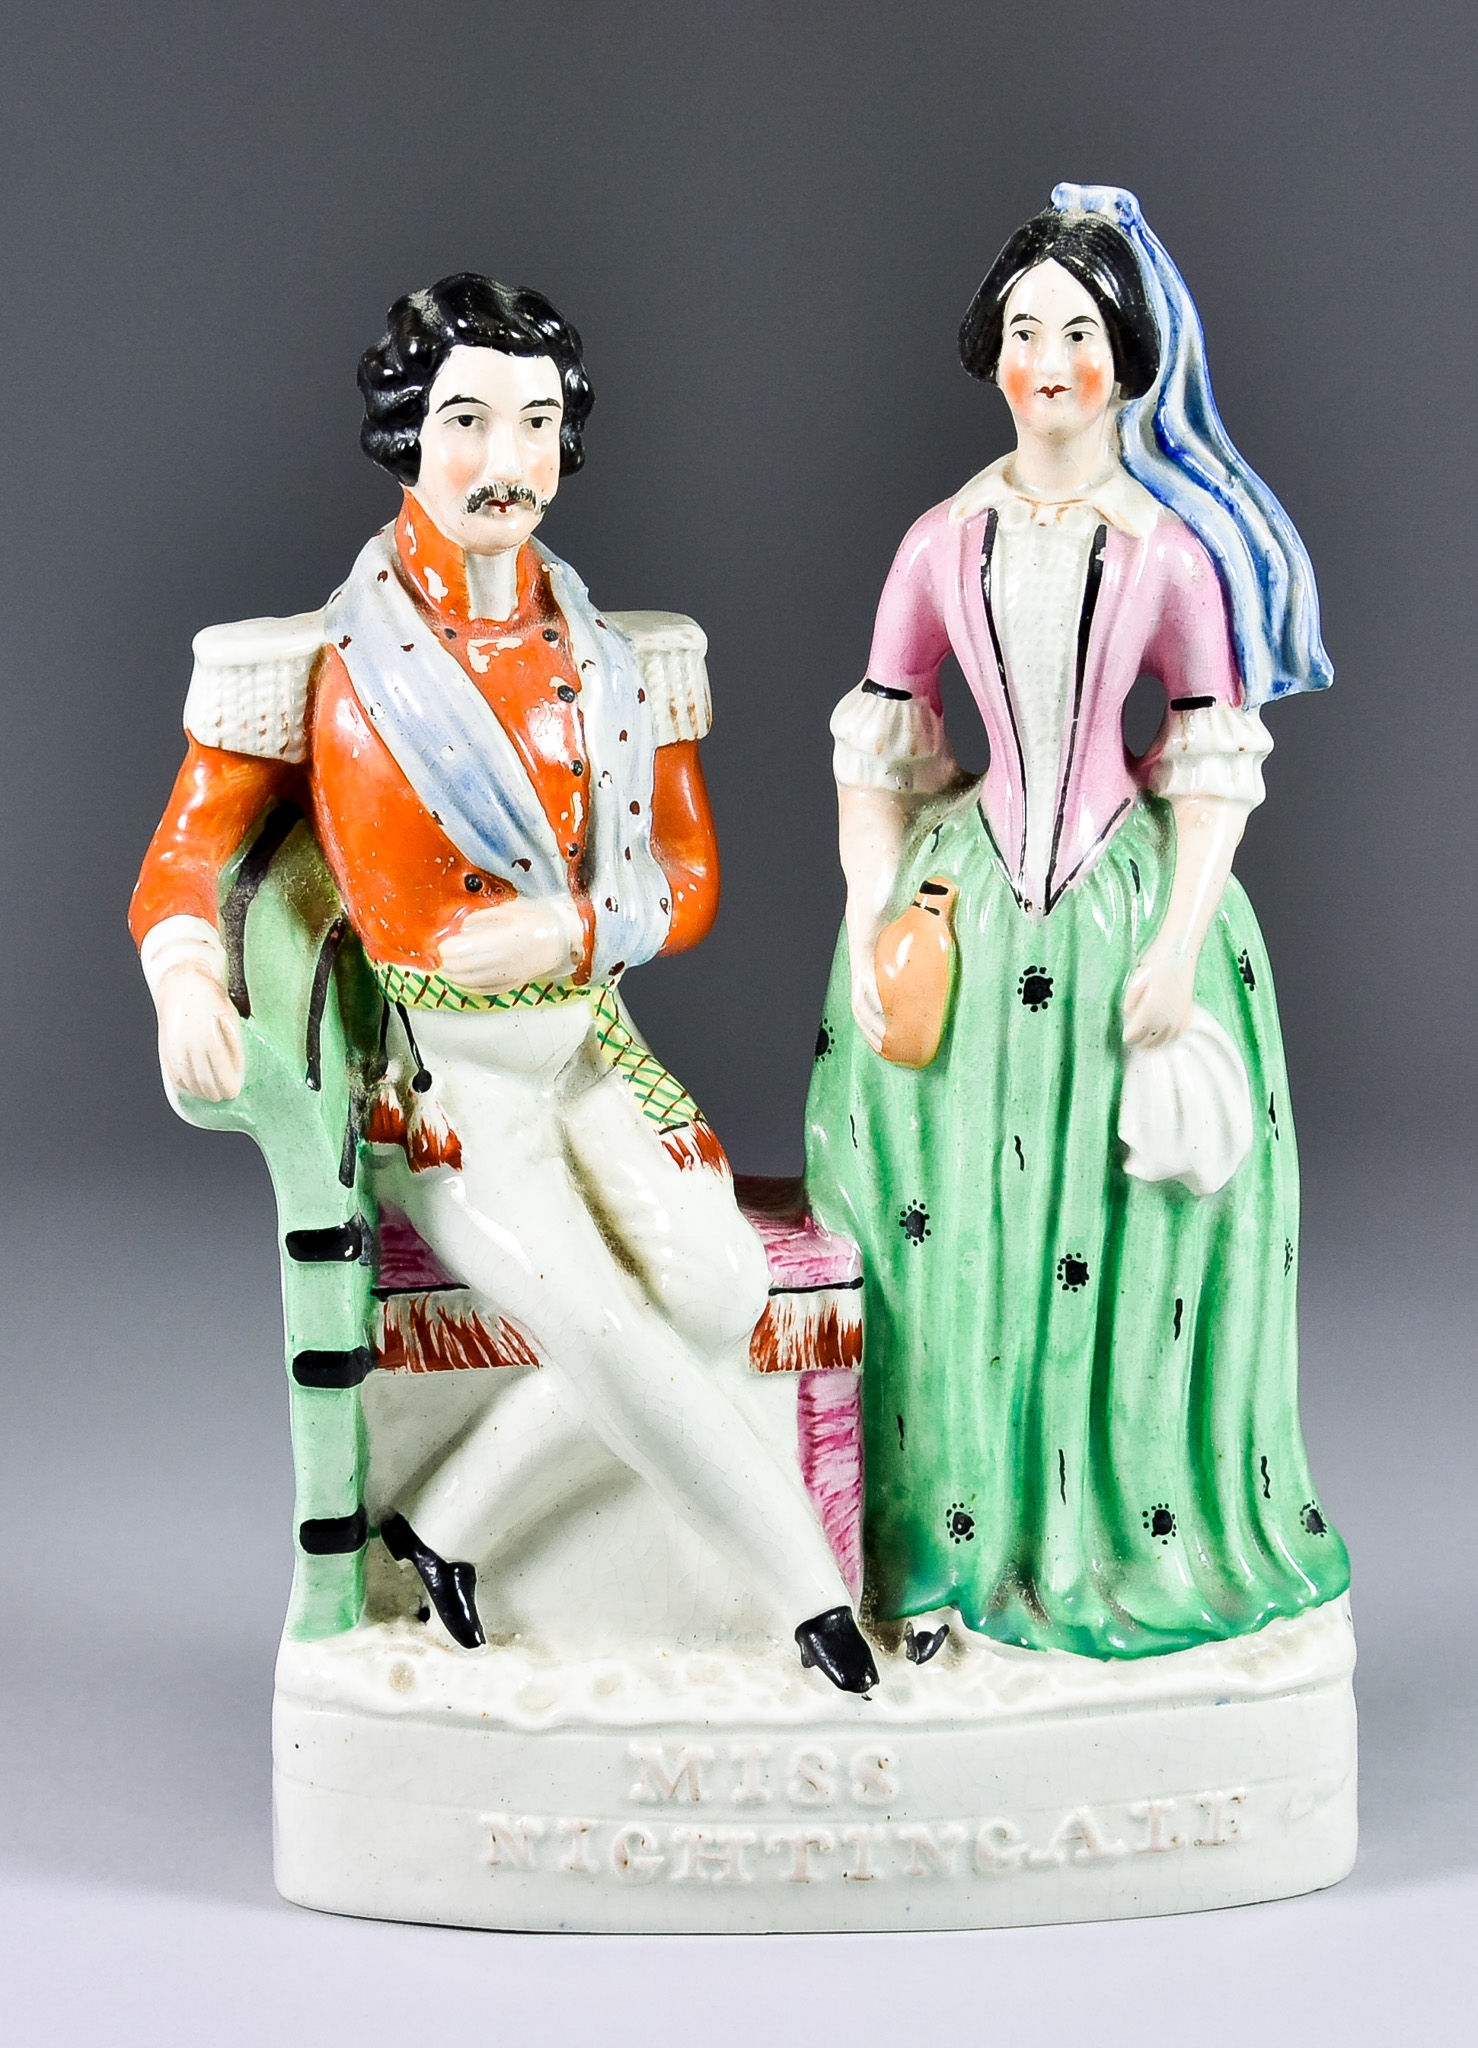 A Mid 19th Century Staffordshire Pottery Flatback Group, Miss Nightingale, circa 1855, modelled as